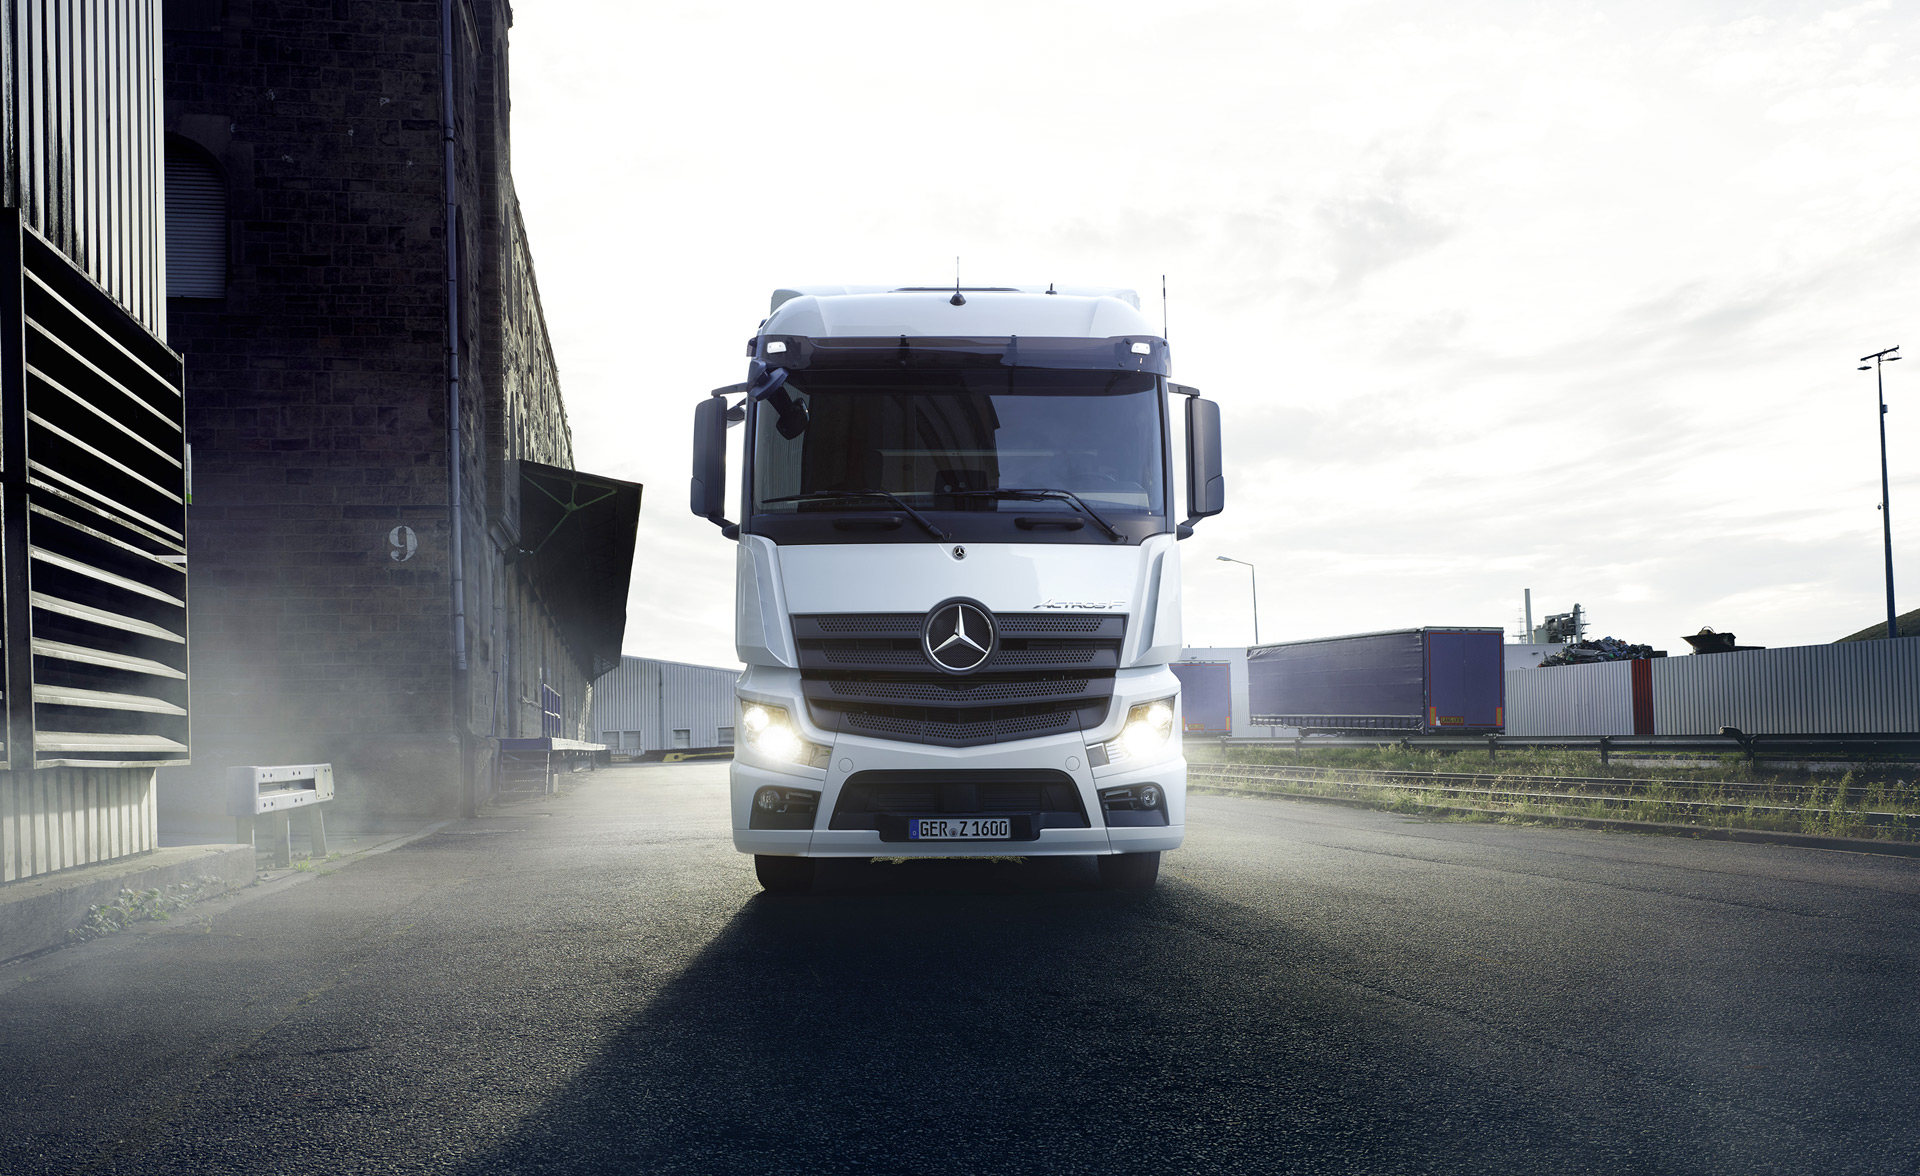 Daimler to rebrand as Mercedes-Benz, spin off truck division